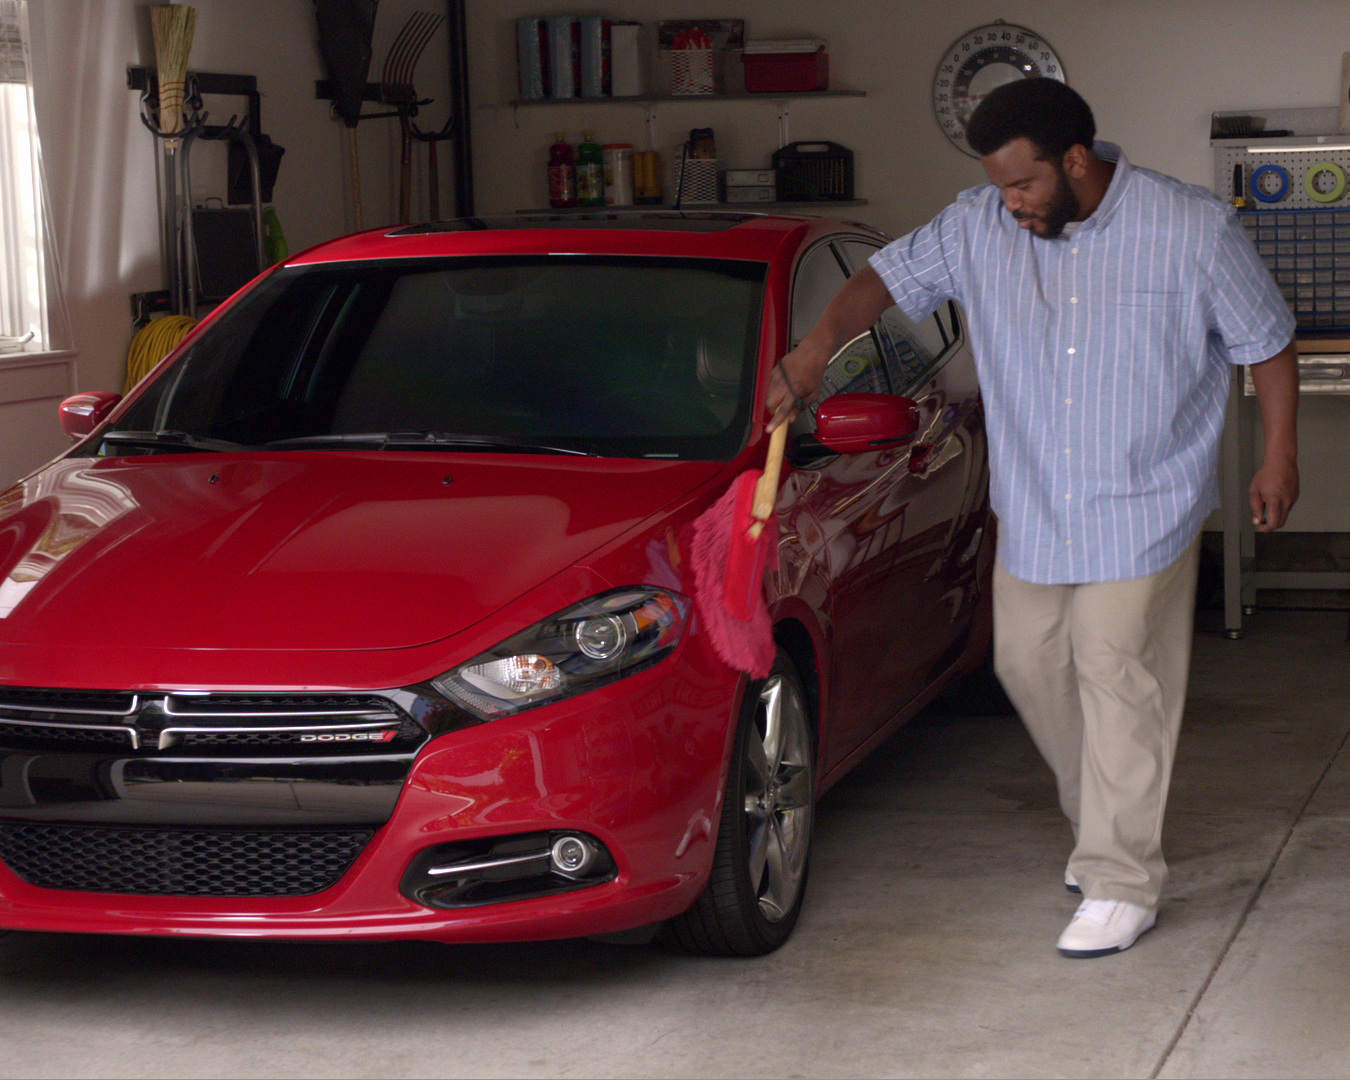 Craig Robinson and Jake Johnson Star in “Don’t Touch My Dart” Ads